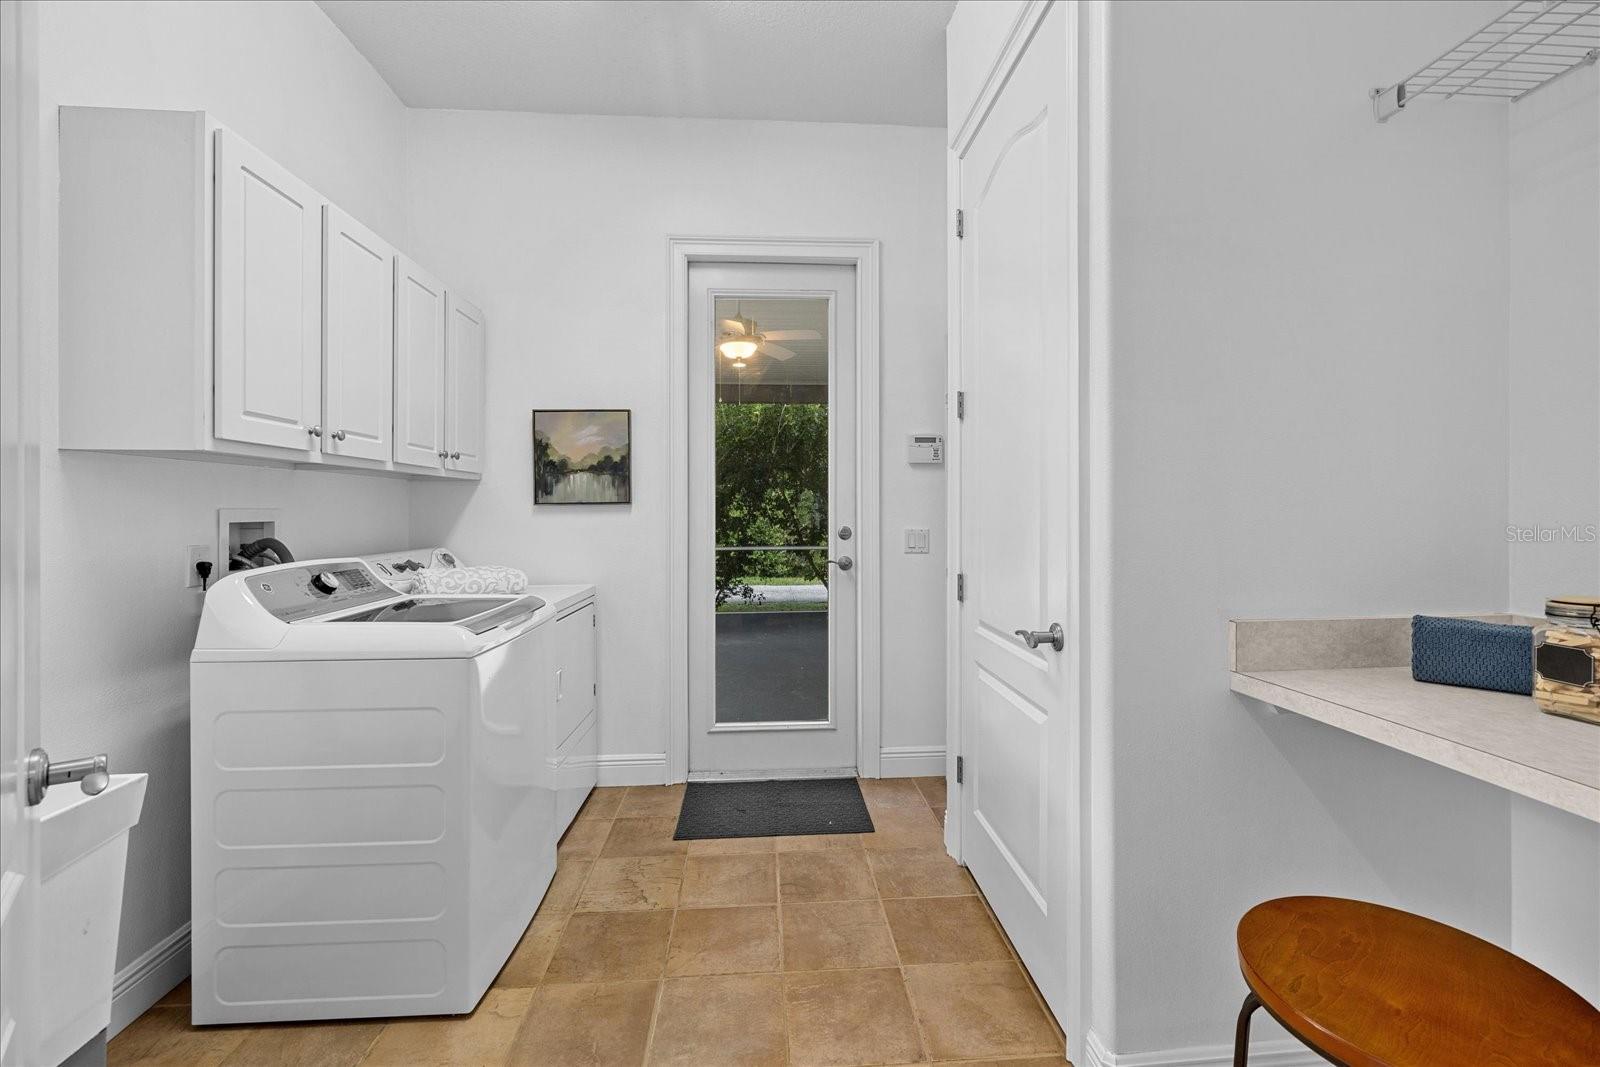 Large mudroom/laundry with exterior access.